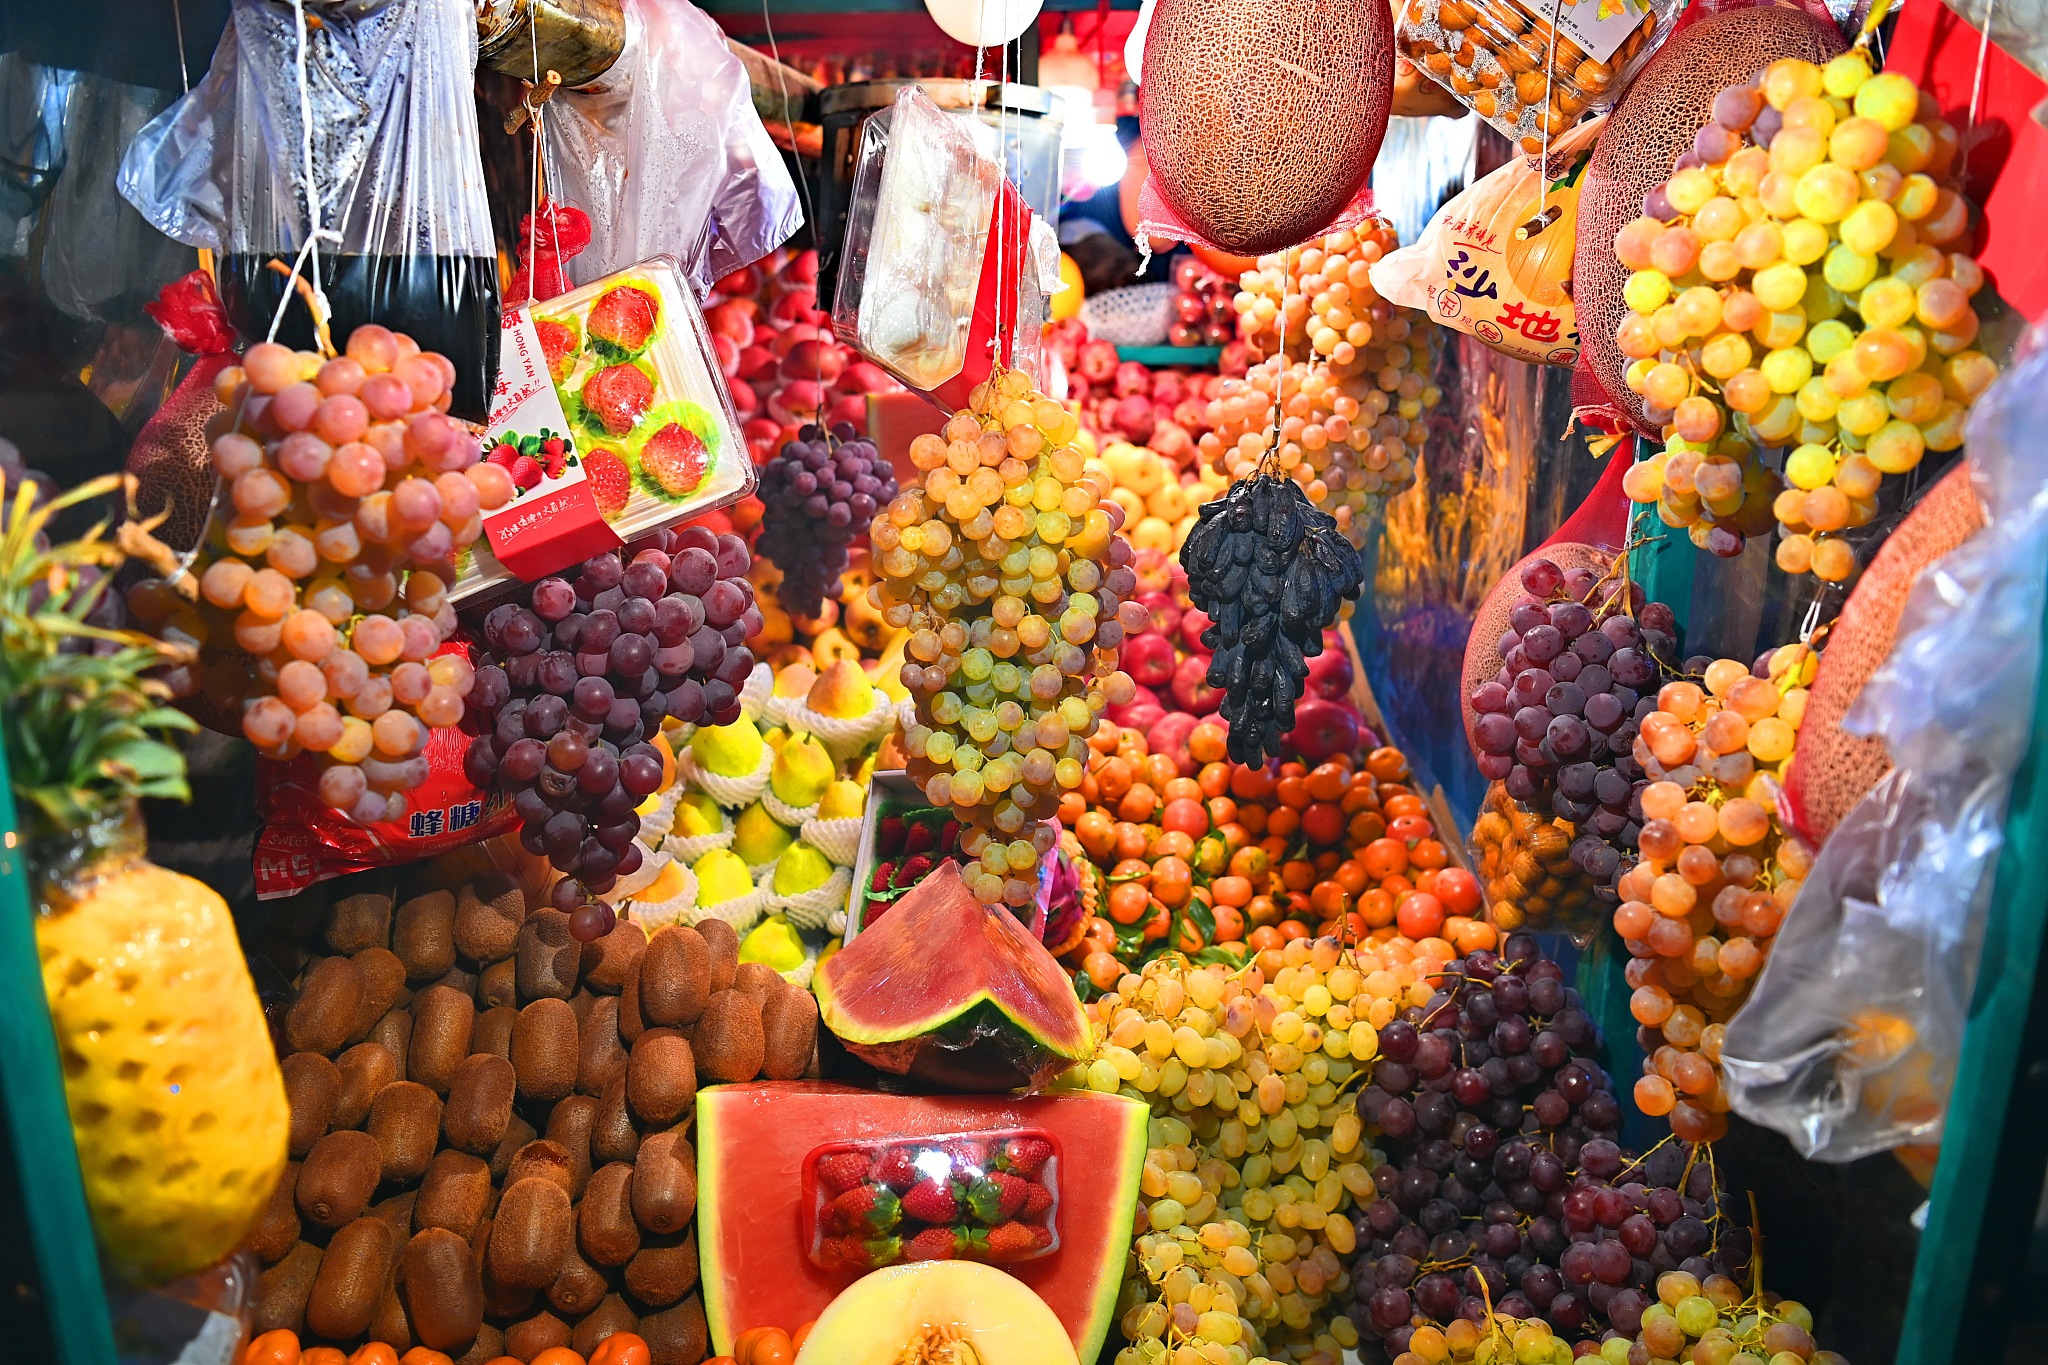 A file photo shows a fruit store in Ili, northwest China's Xinjiang Uygur Autonomous Region. /CFP